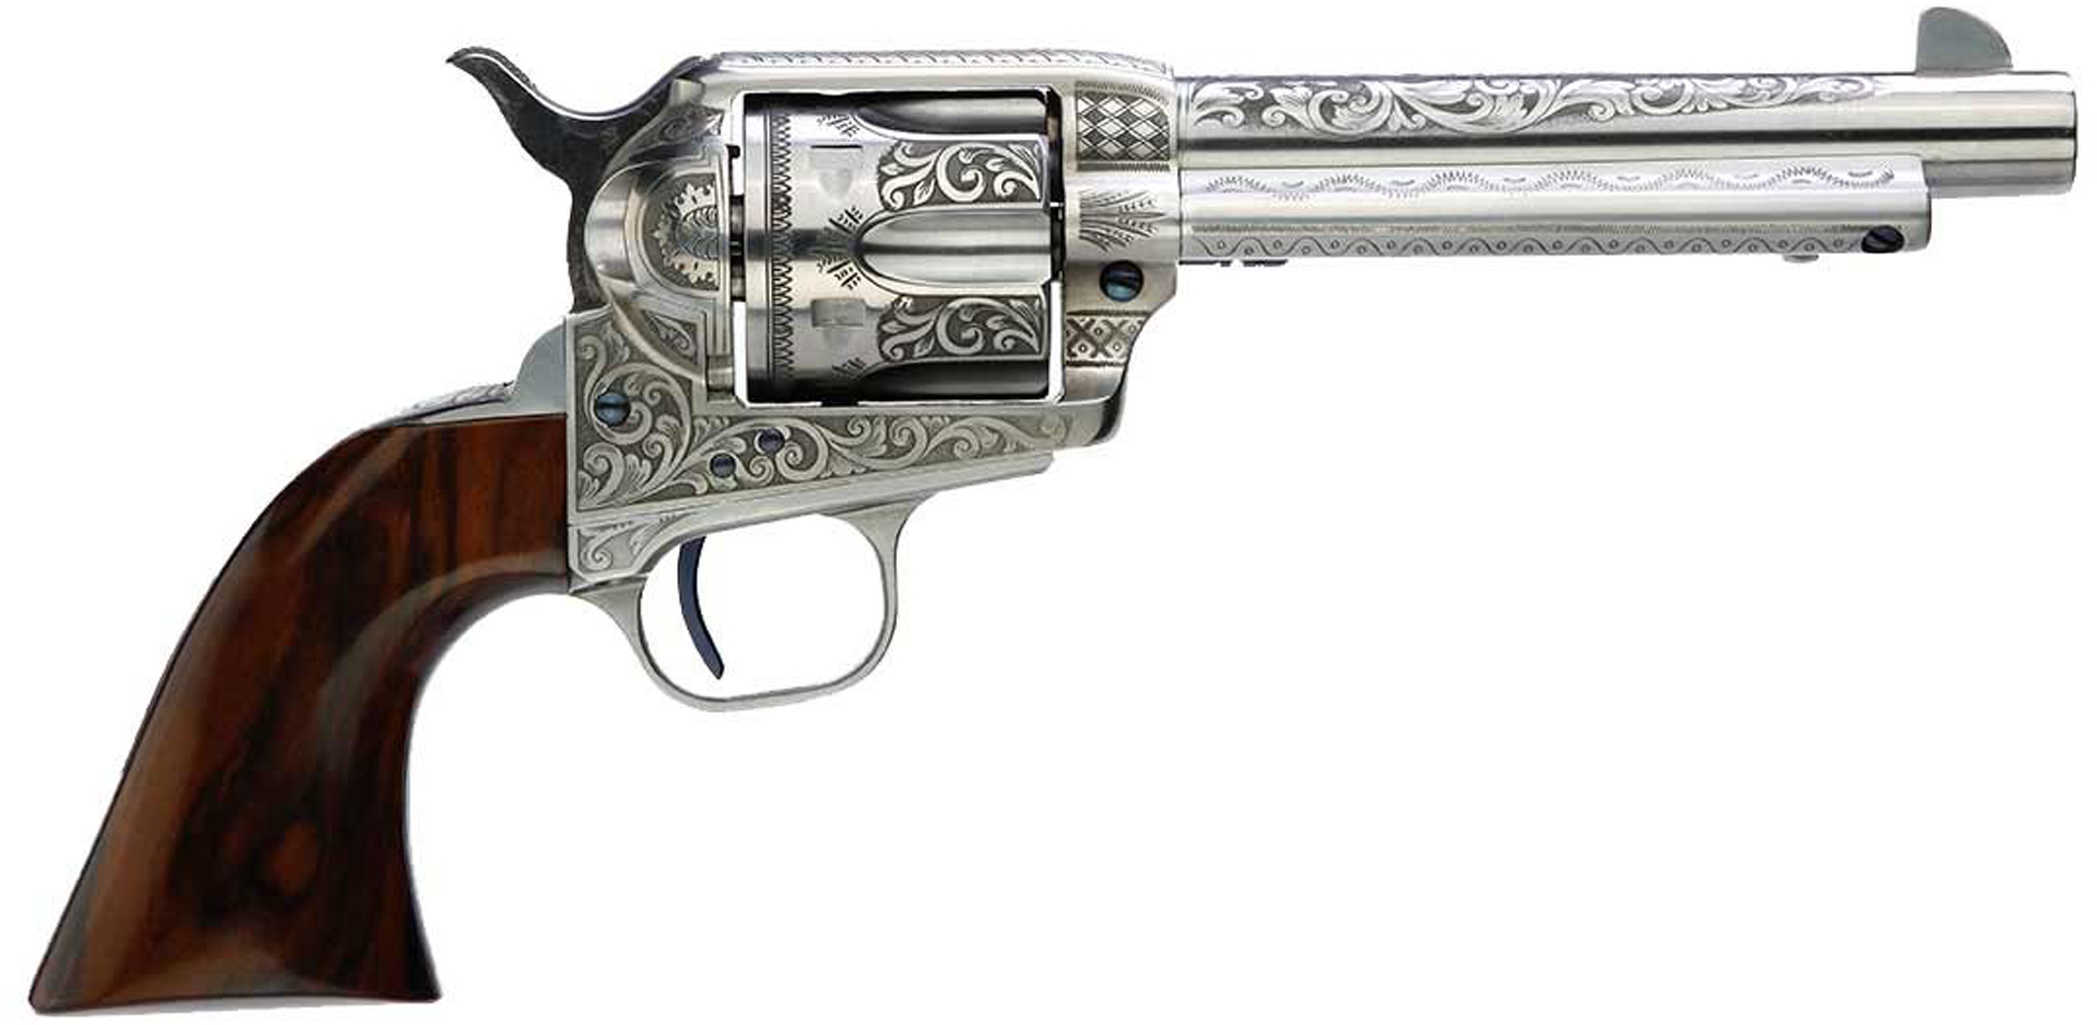 Taylor Uberti 1873 Cattleman Photo Engraved Revolver 357 Mag With Hand Etching White 4.75" Barrel